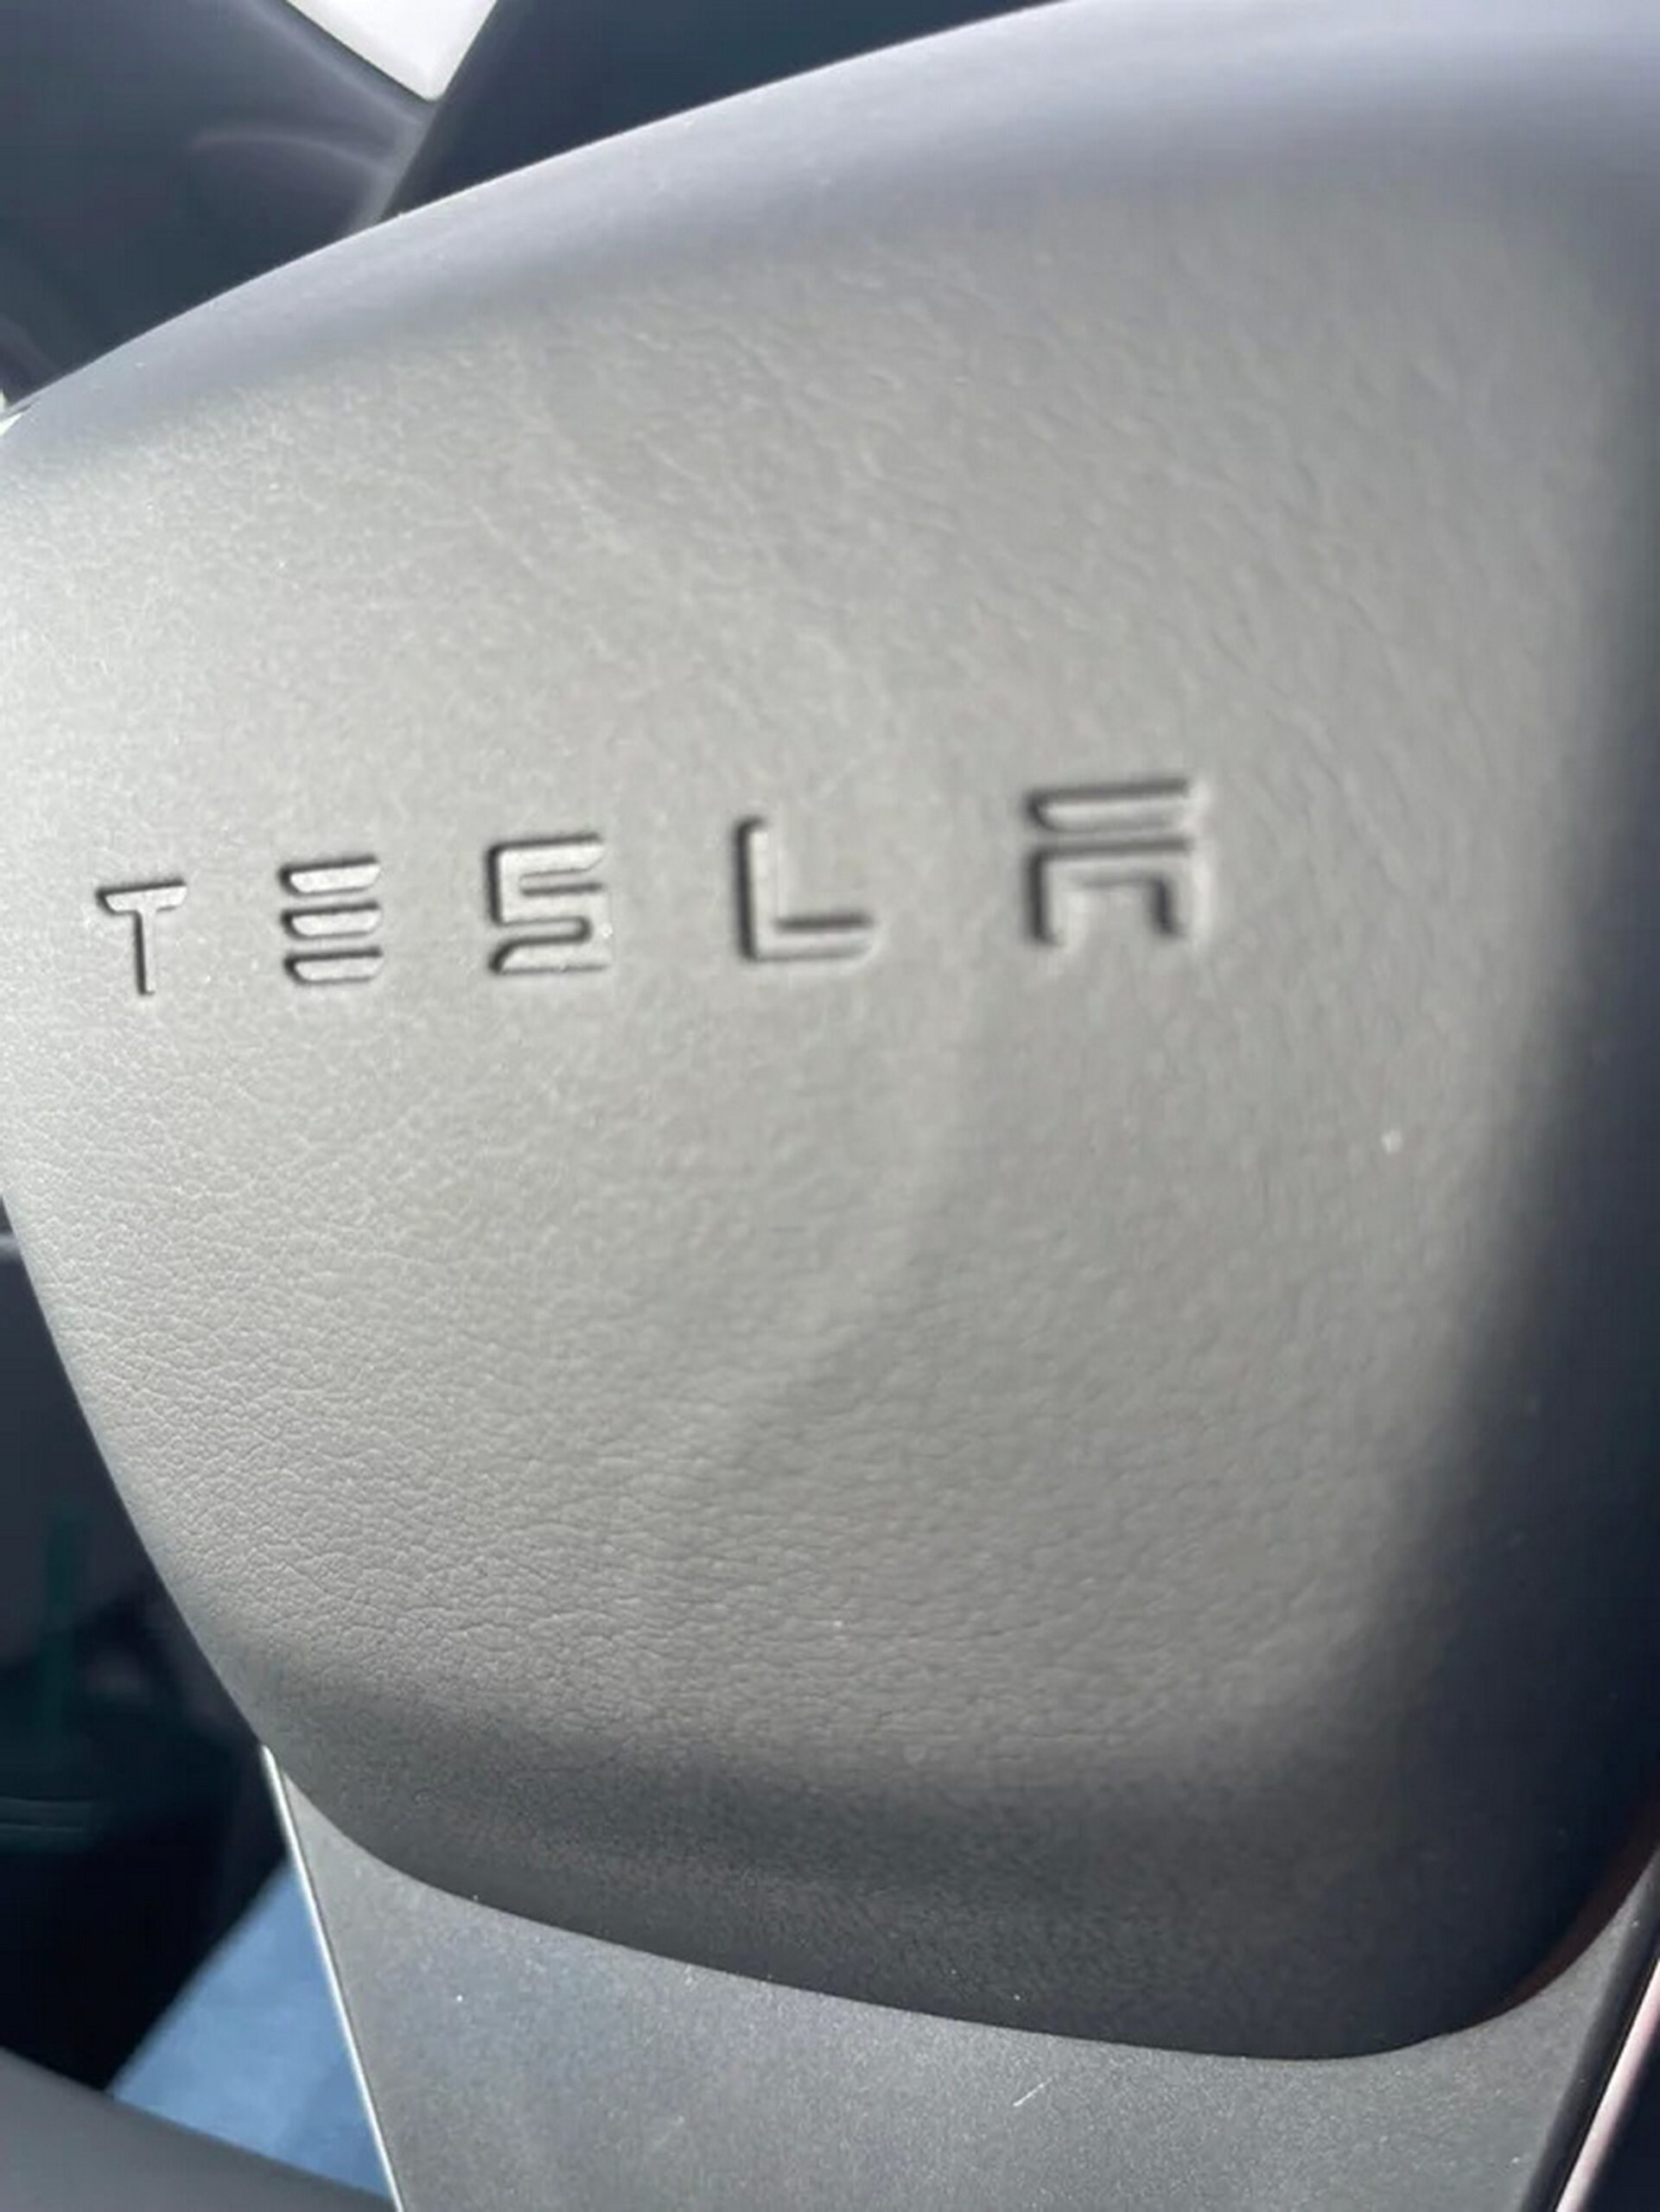 Quality Issues In Tesla Steering Yoke Persist Following Rollout Of New  Version